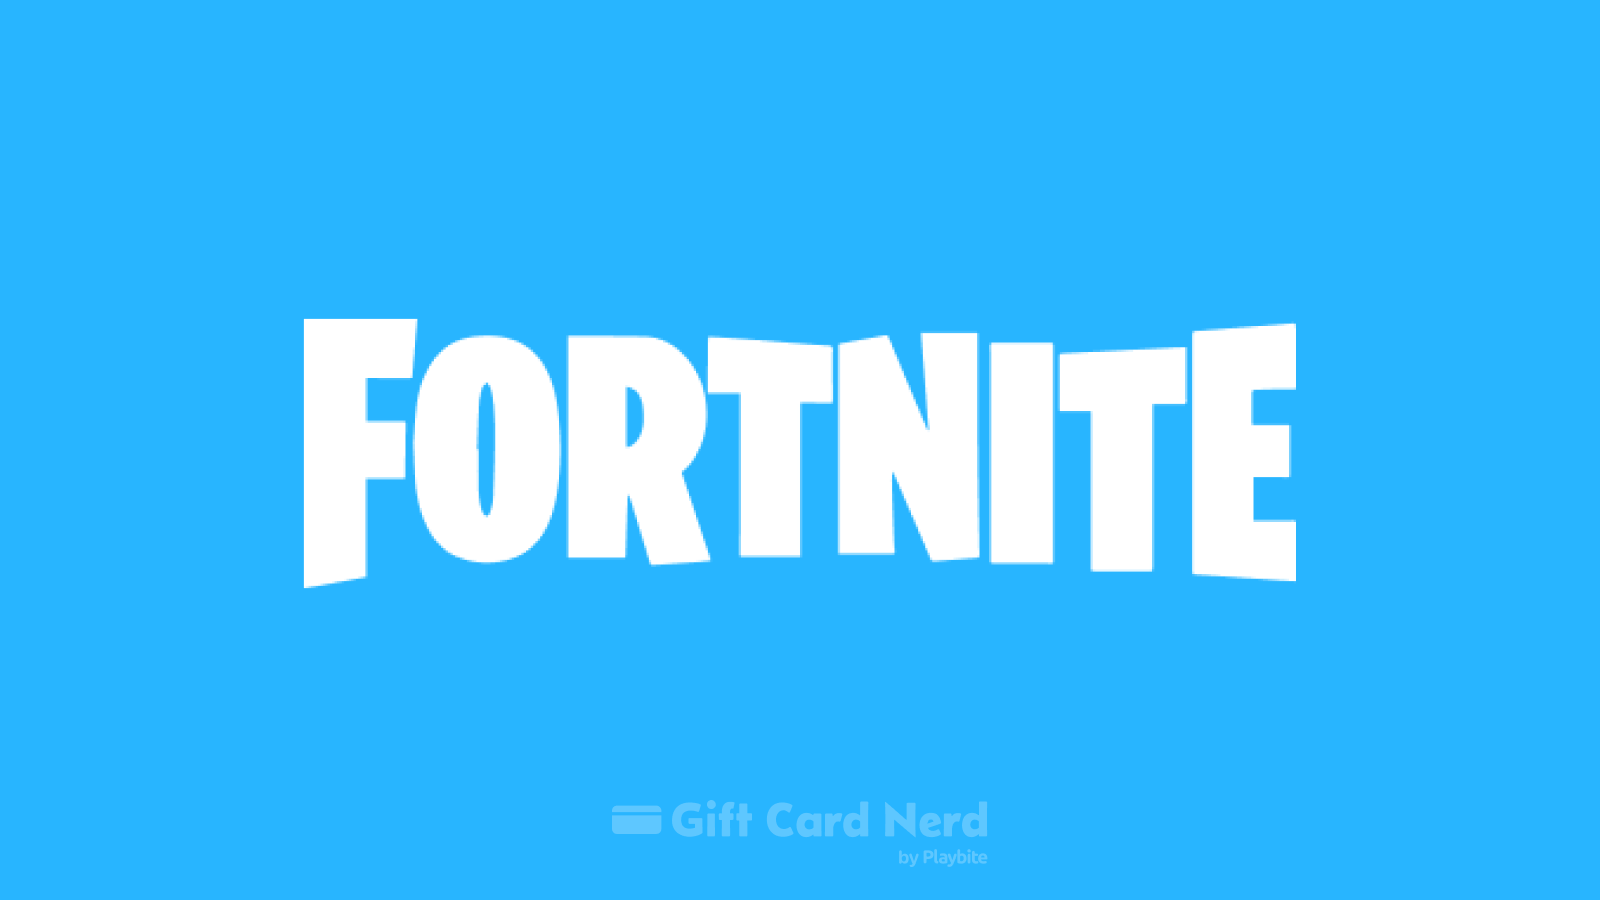 Does Target Sell Fortnite Gift Cards?